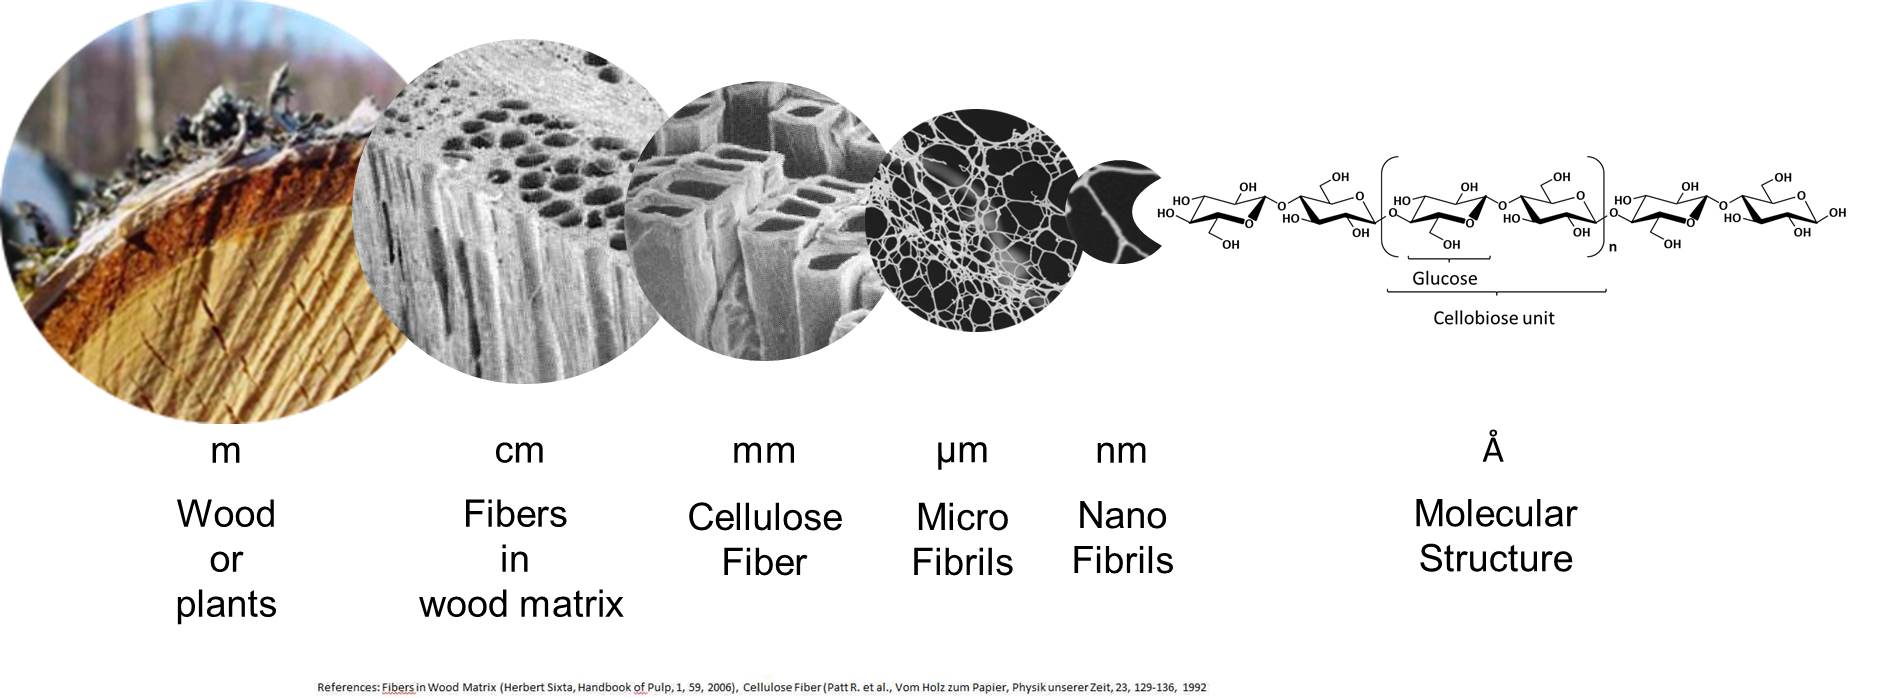 What is microfibrillated cellulose?